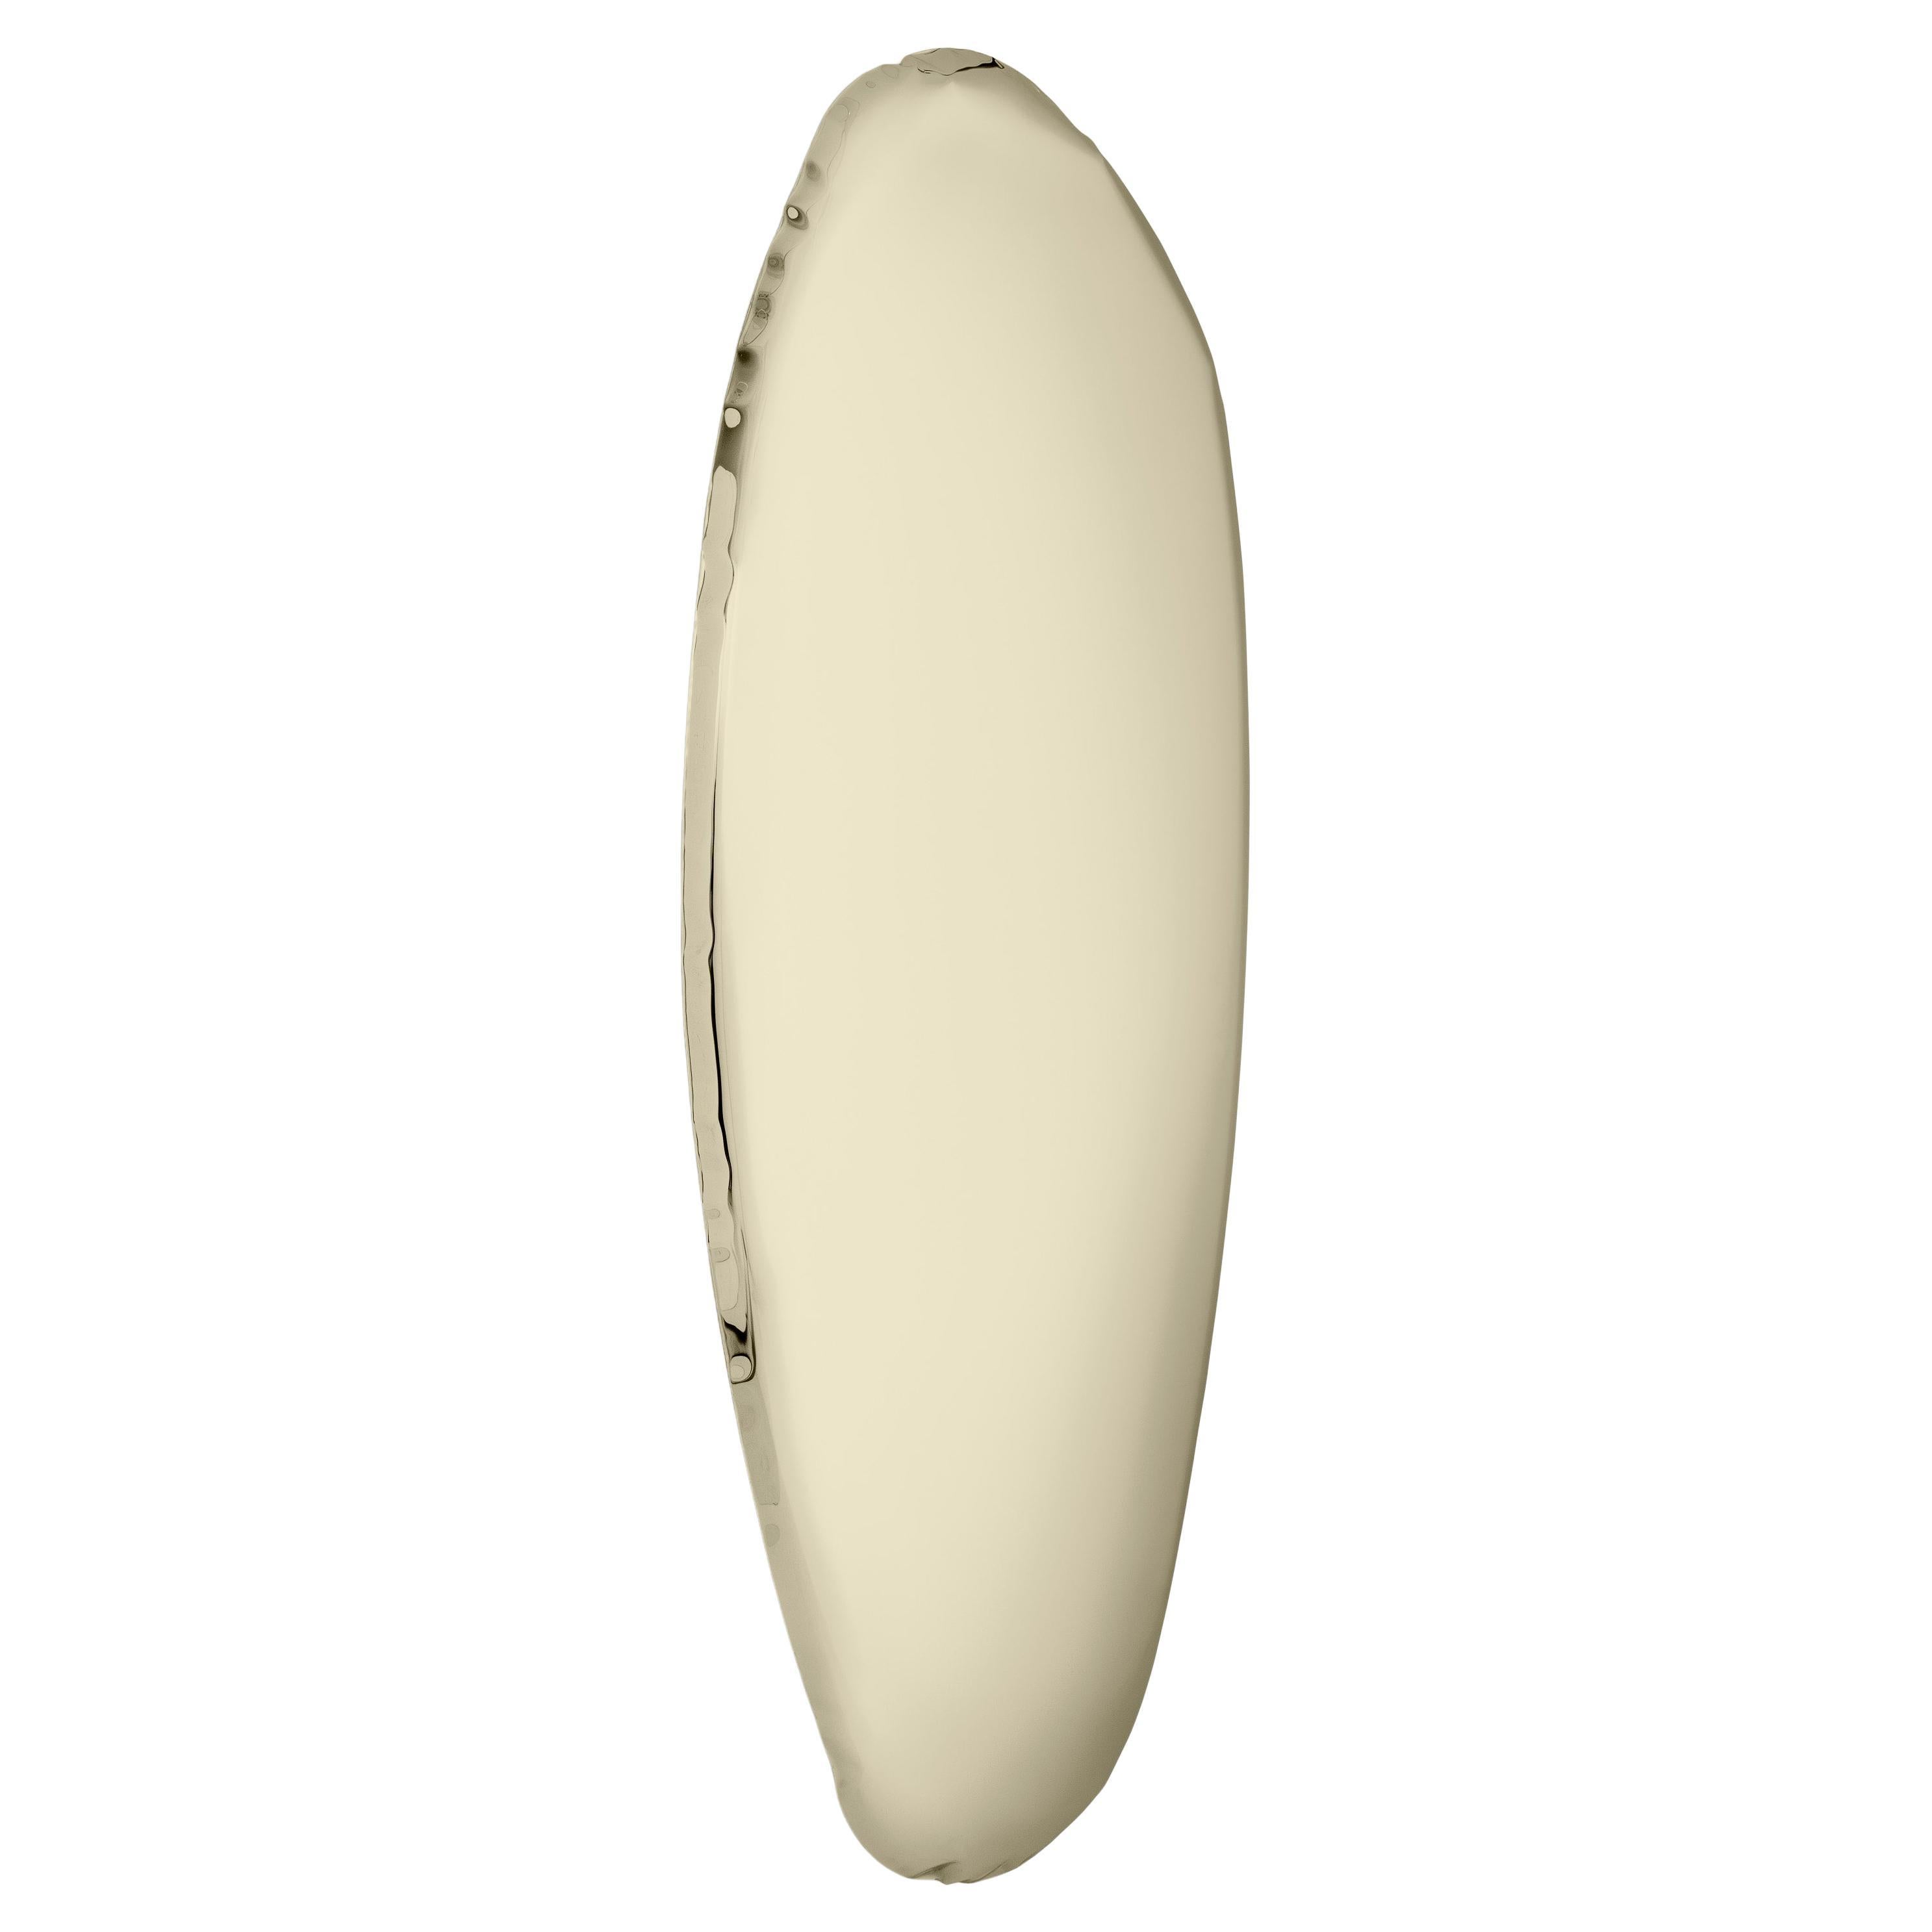 Tafla O1 Polished Stainless Steel Light Gold Color Wall Mirror by Zieta